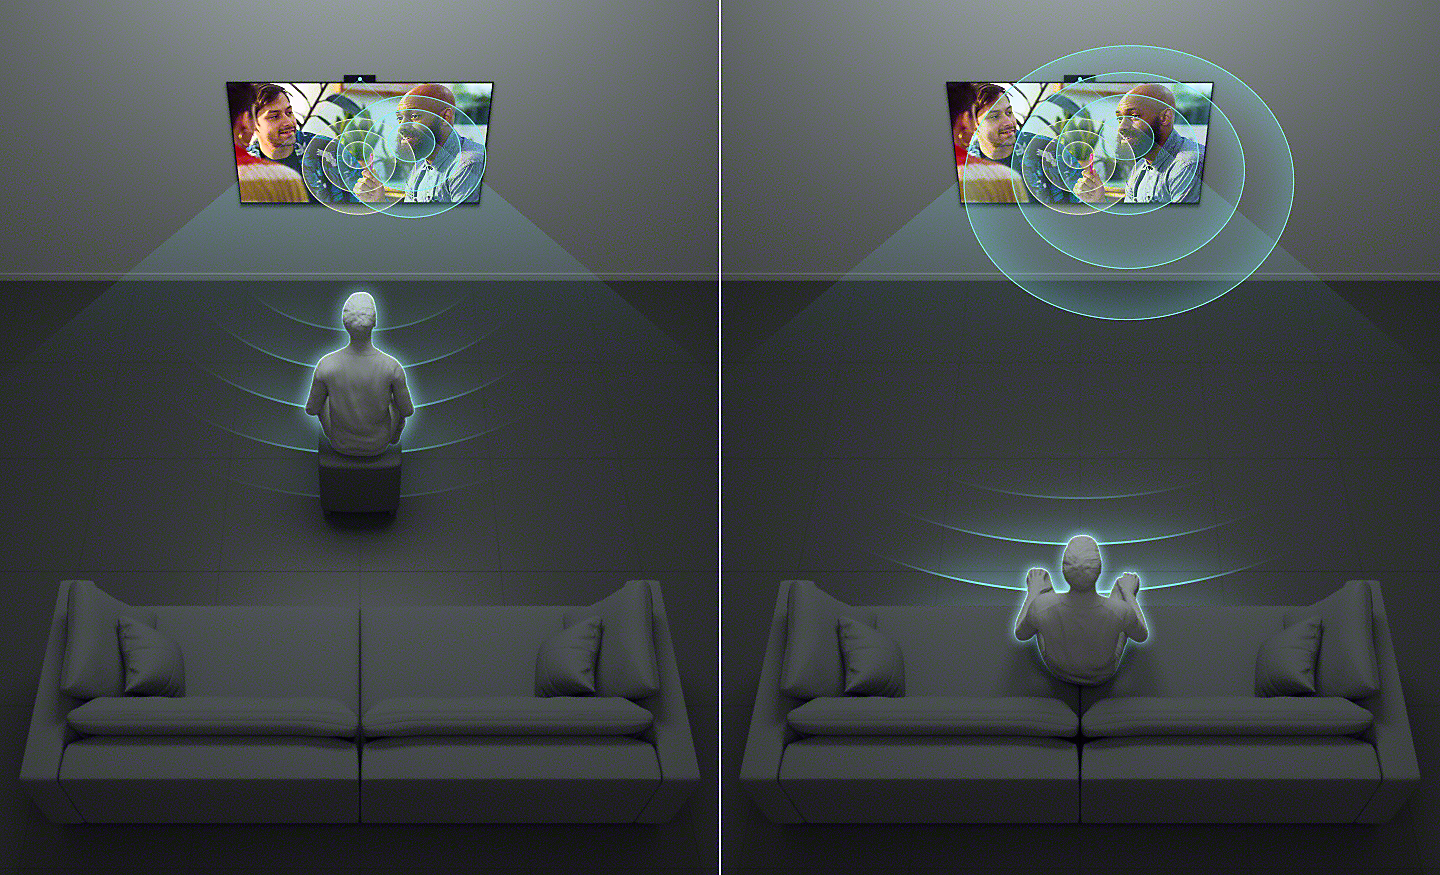 Split-screen graphic showing a person listening to TV close up and a person listening to another TV from afar